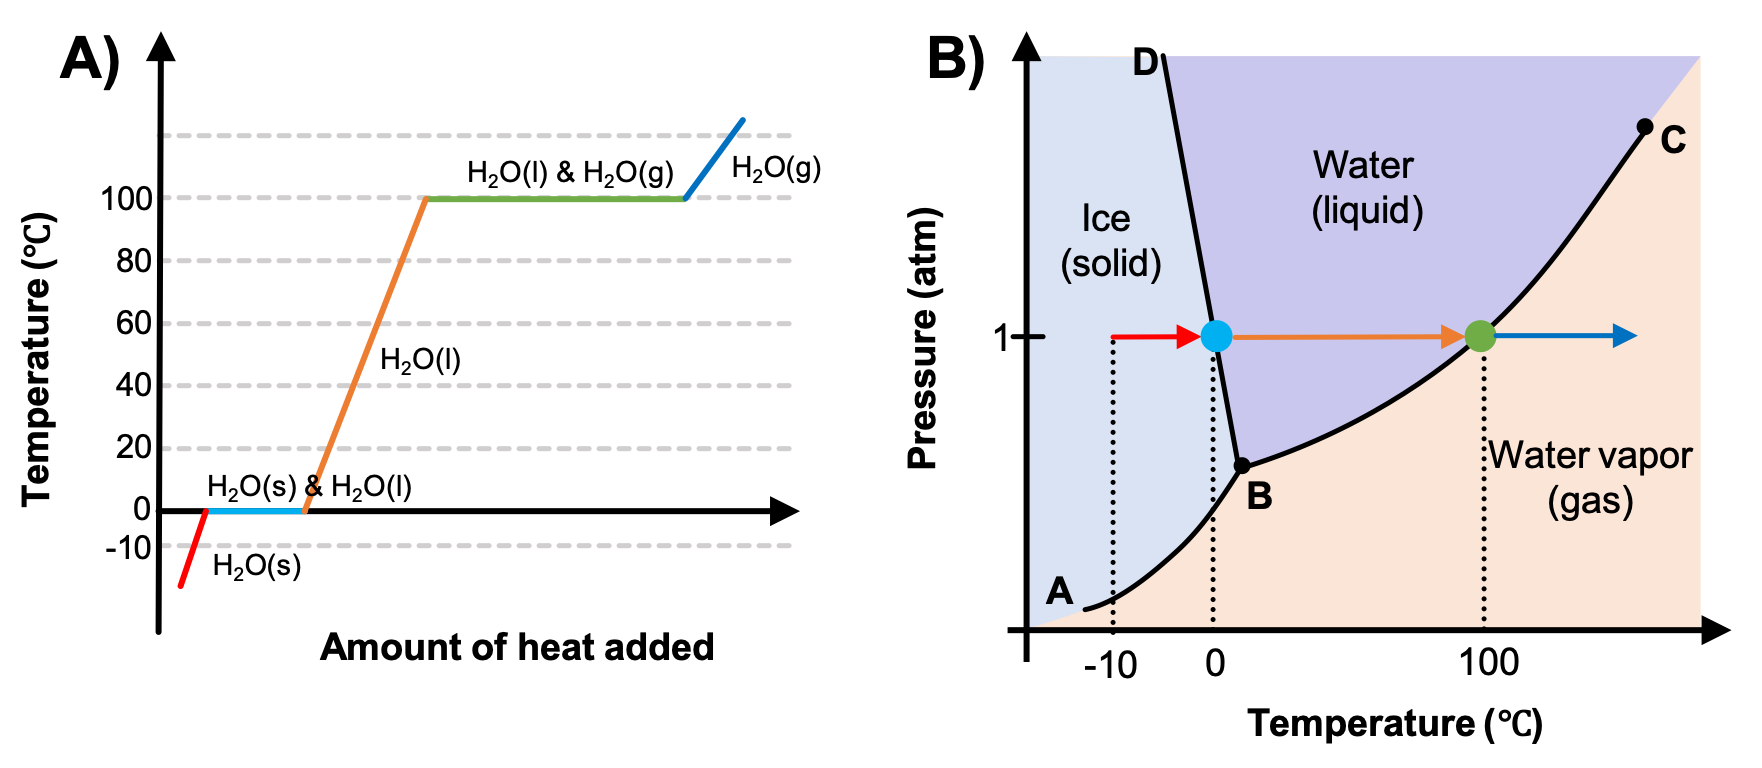 This figure has a part “A” and “B”. In part A, we see a heating curve for water. The Y axis is labeled “Temperature (degrees Celsius)” and the X axis is labeled “Amount of heat added”. The data shows a red line that is labeled “H2O(s)” that start at -10 degrees celsius and increases to 0 degrees celsius. Then there is a light blue horizontal line that is labeled with “H2O(s) & H2O(l)” for the melting of ice. An orange line is labeled with “H2O(l)” as the liquid water is heated from 0 degrees to 100 degrees. A green horizontal line is labeled with “H2O(l) & H2O(g)” and represents the boiling of water. A dark blue line is labeled with “H2O(g)” and represents the temperature change of the gas after all the liquid has been vaporized. In part B of the figure, there is a phase diagram with the Y axis labeled “Pressure (atm)” and the X axis labeled “Temperature (degrees Celsius)”. The typical phase diagram for water is shown. A line extends from the origin of the graph which is labeled “A” sharply upward to a point in the bottom third of the diagram labeled “B” where it branches into a line that slants slightly backward until it hits the highest point on the y-axis labeled “D” and a second line that extends to the upper right corner of the graph labeled “C”. The two lines bisect the graph area to create three sections, labeled “Ice (solid)” near the middle left, “Water (liquid)” in the top middle and “Water vapor (gas)” near the bottom middle. A red arrow starts at the point (-10, 1) and points right toward increasing temperature. A dotted line extends downward to the x axis to indicate that it starts at -10 degrees celsius. This red arrow corresponds to the heating of the ice in part A of the figure which was also colored red. The arrow ends at the line that separates the solid and liquid. On the line between solid and liquid, there is a light blue dot that corresponds to the light blue dot on the heating curve as the ice melts. There is a dotted line that extends downward to 0 degrees from the light blue point. During this melting process, there is no arrow because the temperature remains constant. Then an orange arrow begins at 0 degrees and extends to the right until the phase boundary between liquid and gas. A green point is on this line, with a dotted line that extends to the x axis that shows that it exists at 100 degrees. This is the vaporization of the liquid and no temperature change occurs at this point. Then a dark blue arrow points to the right to indicate heating of the gas. The colors of the arrows and points correlate between the heating curve in part A and the phase diagram in part B.